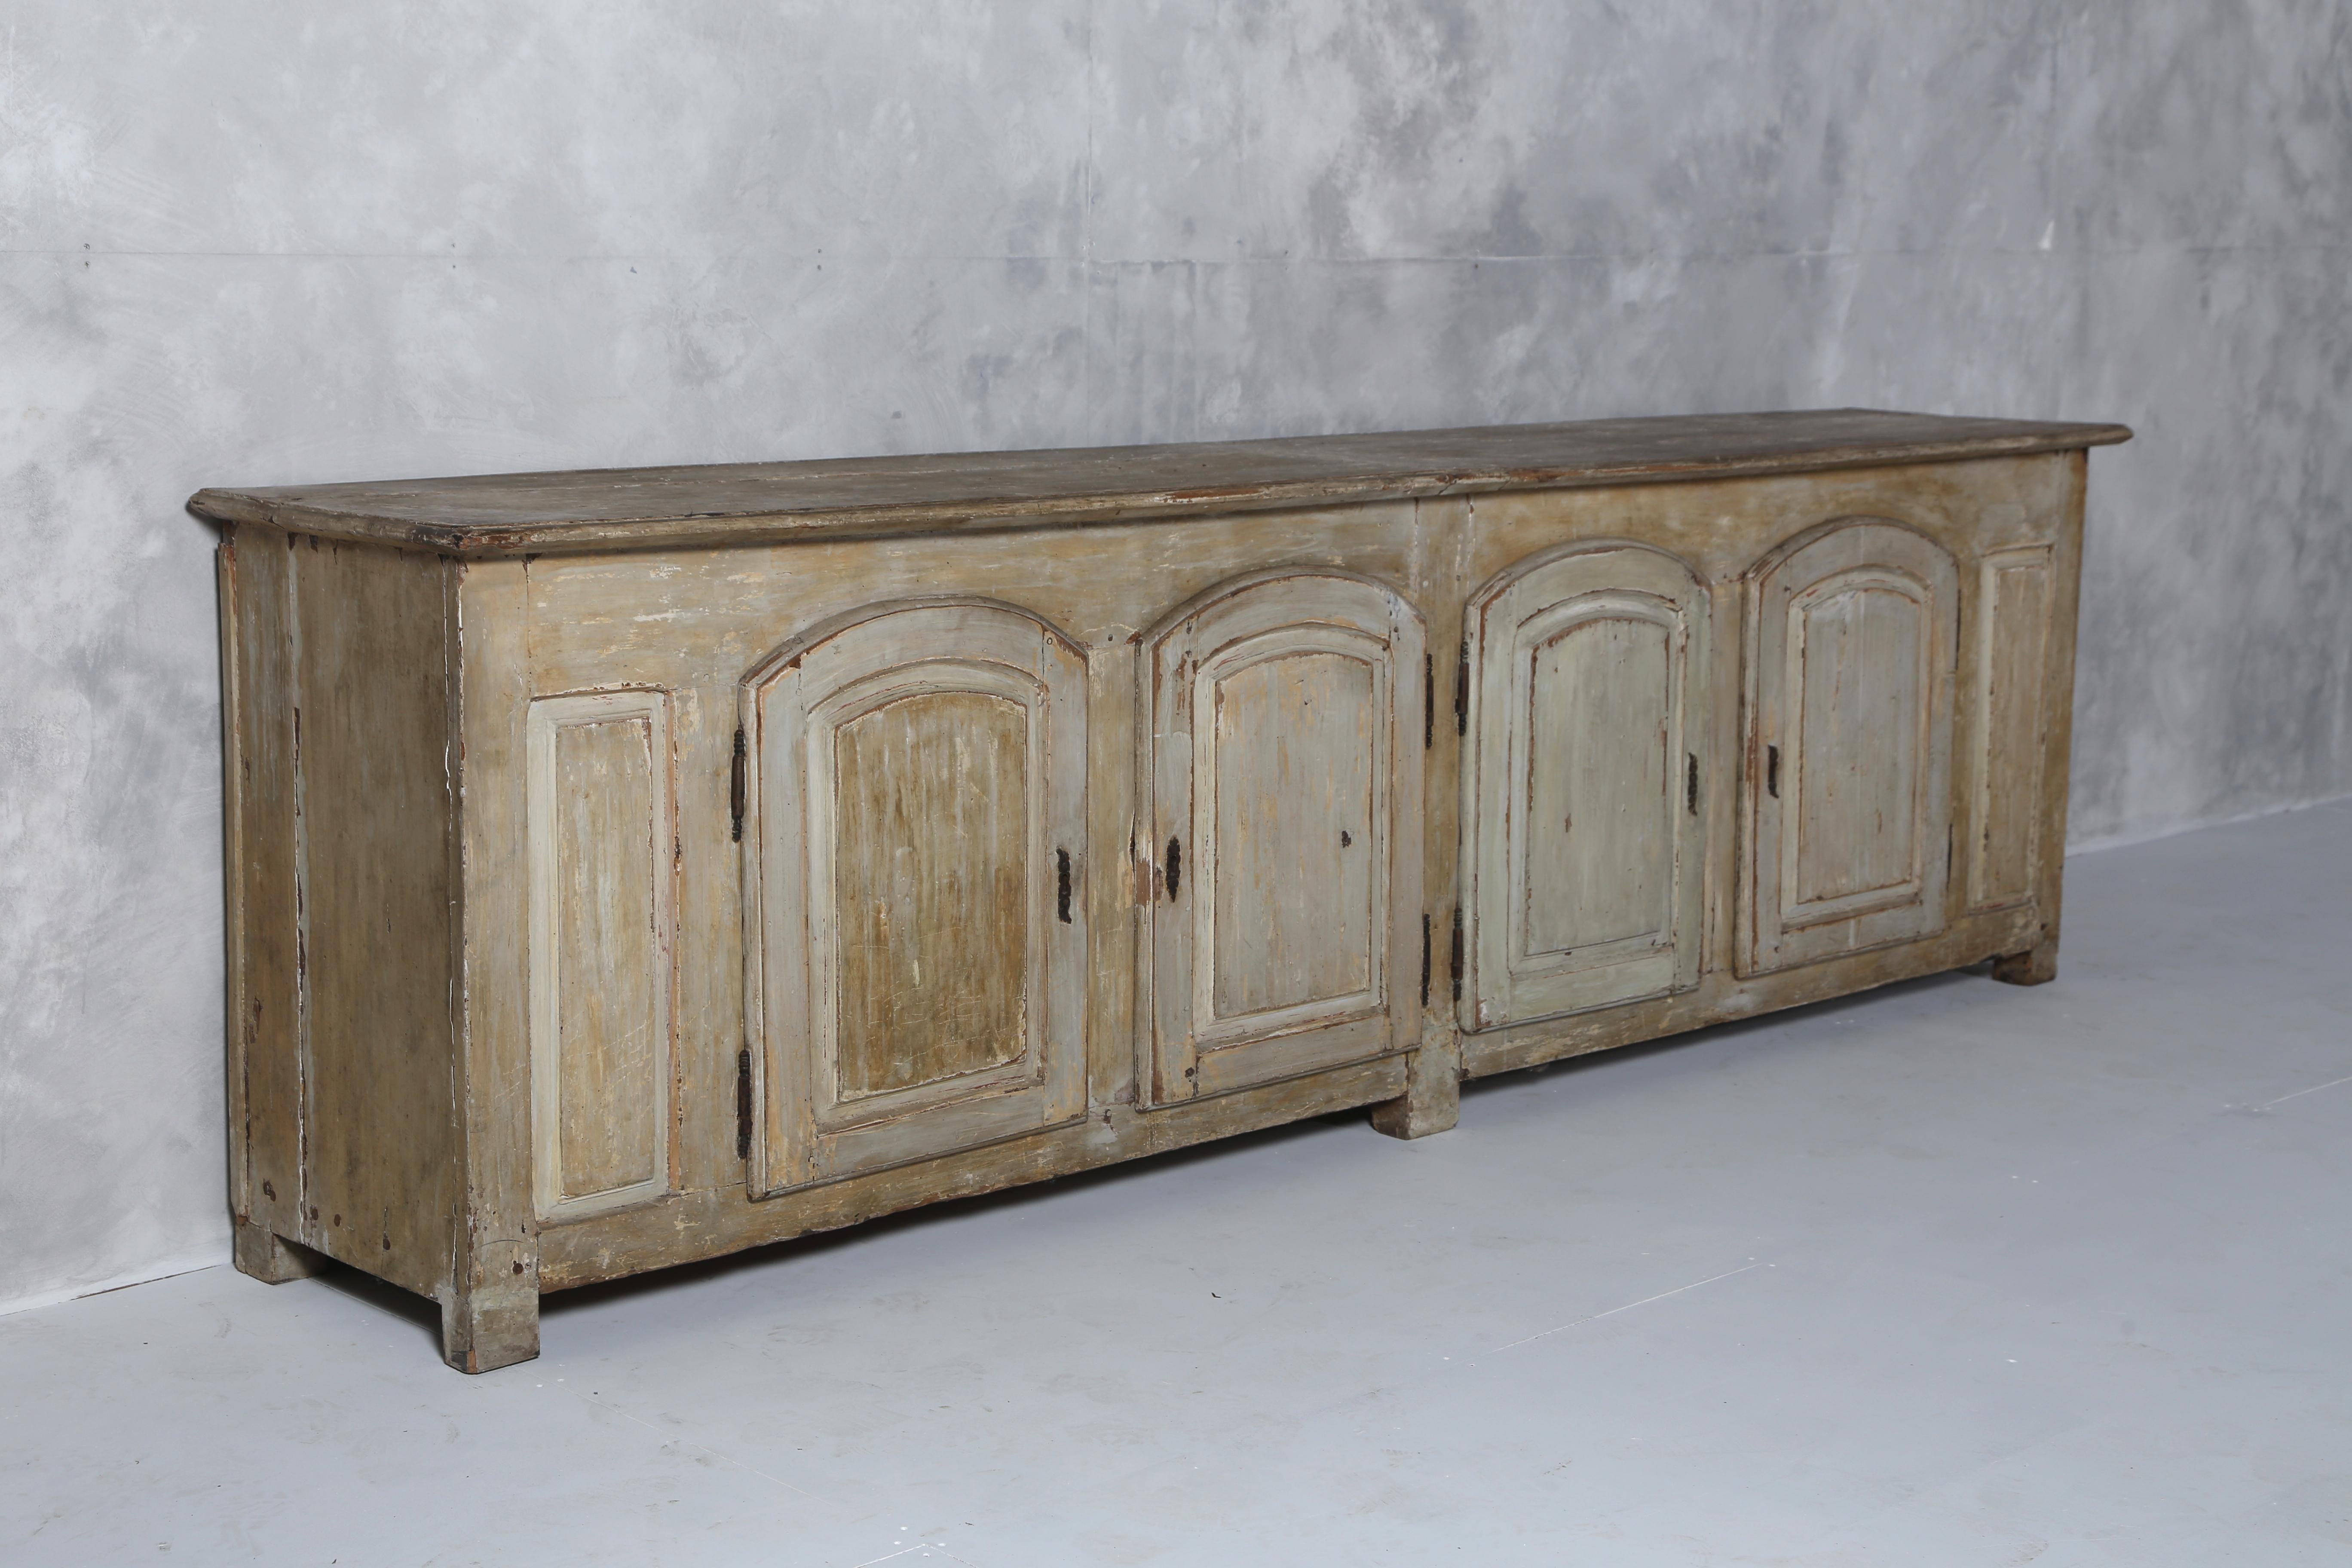 French 18th century Oak Enfilade with its original paintwork, all the doors work well and the overall condition is good.